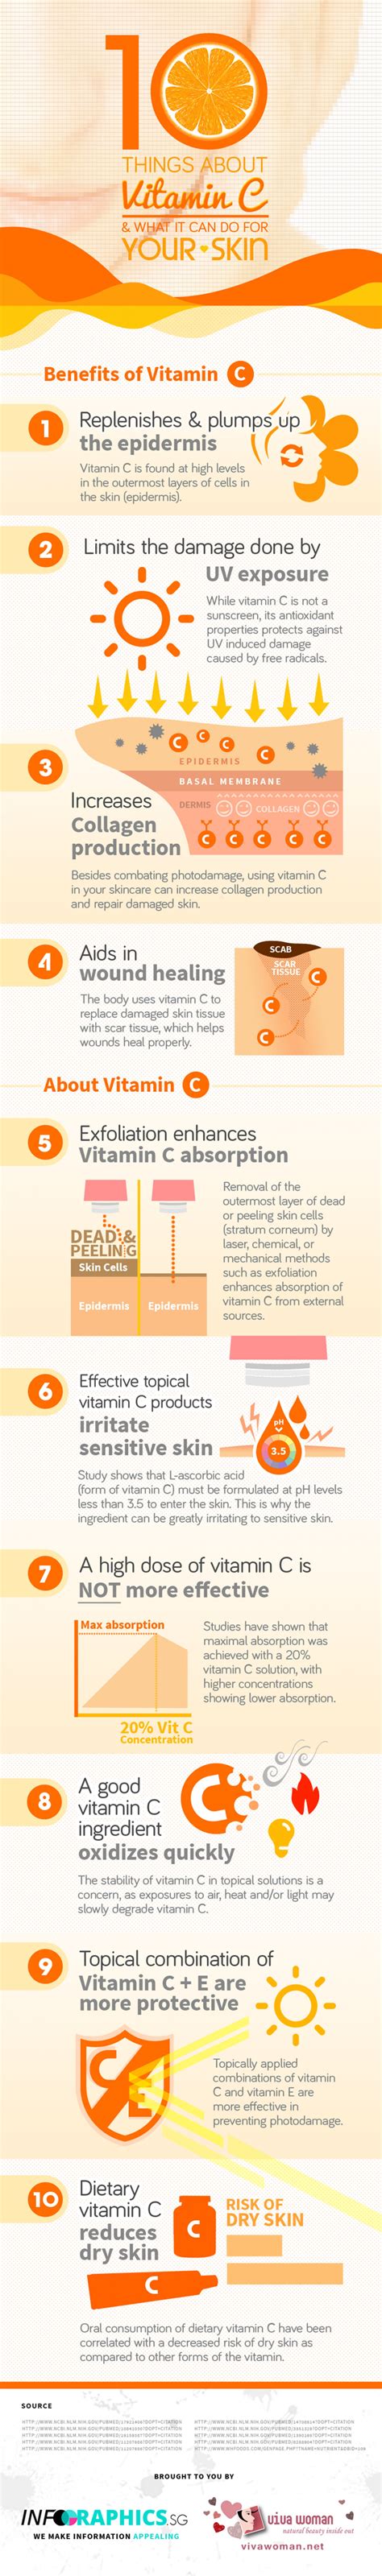 This ubiquitous vitamin not only provides noticeable benefits to your skin, it has the science to back. 10 things about Vitamin C & what it can do for your skin ...